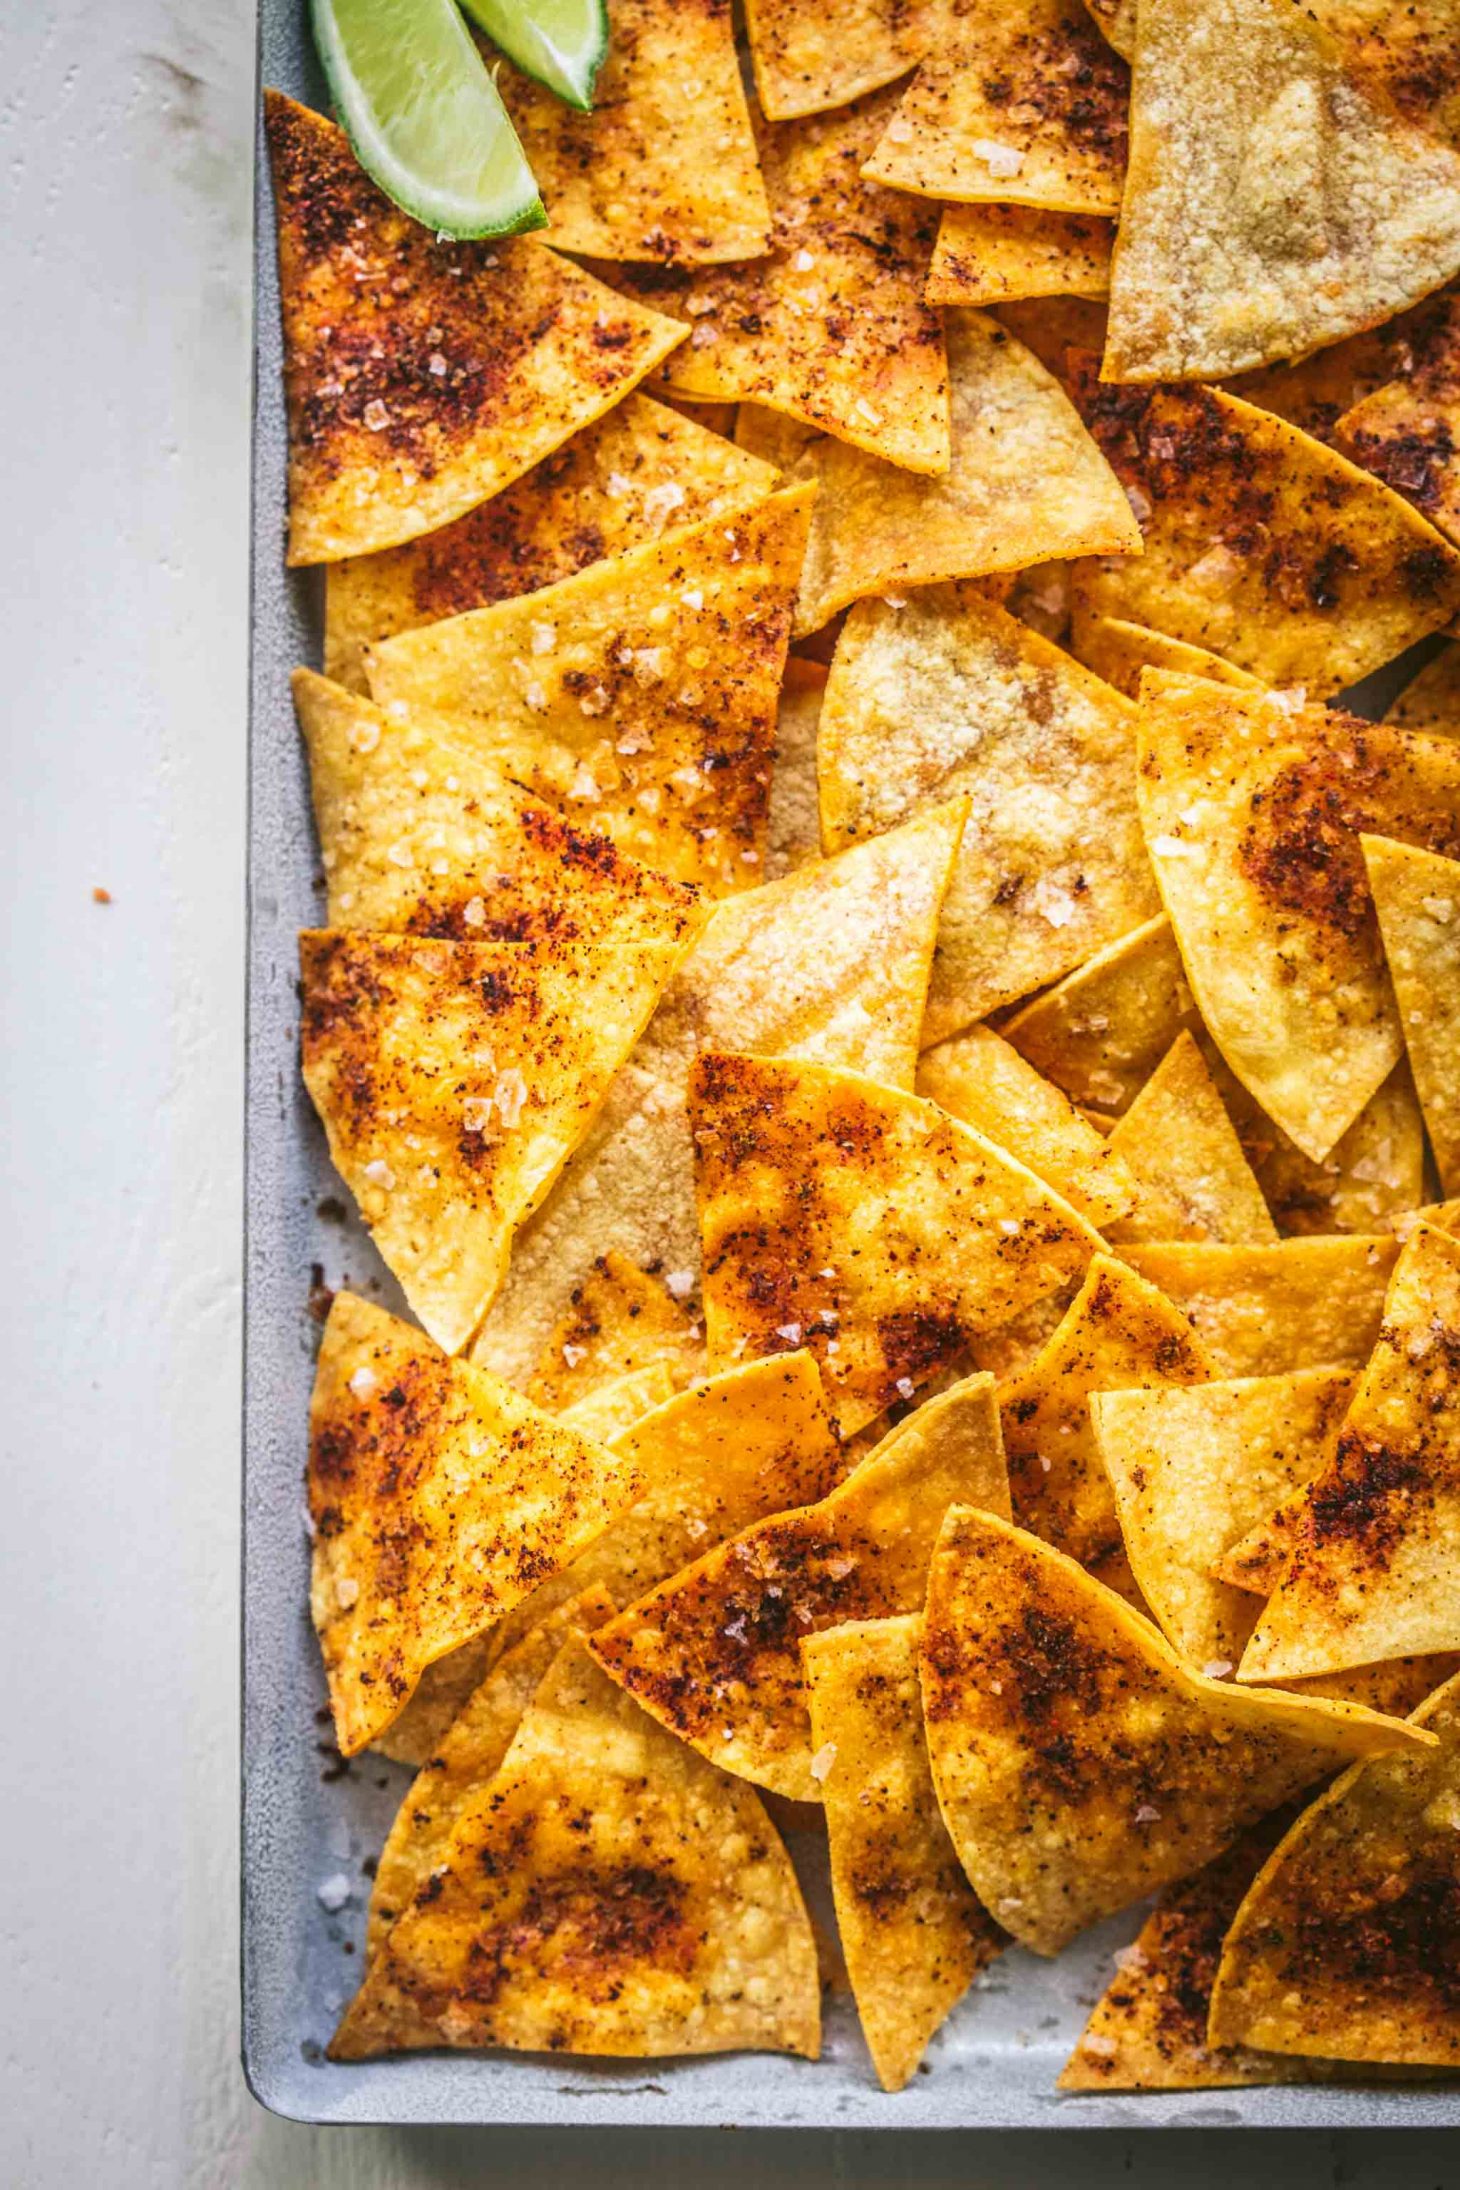 Homemade Baked Tortilla Chips in Minutes! (Healthy + Delicious)